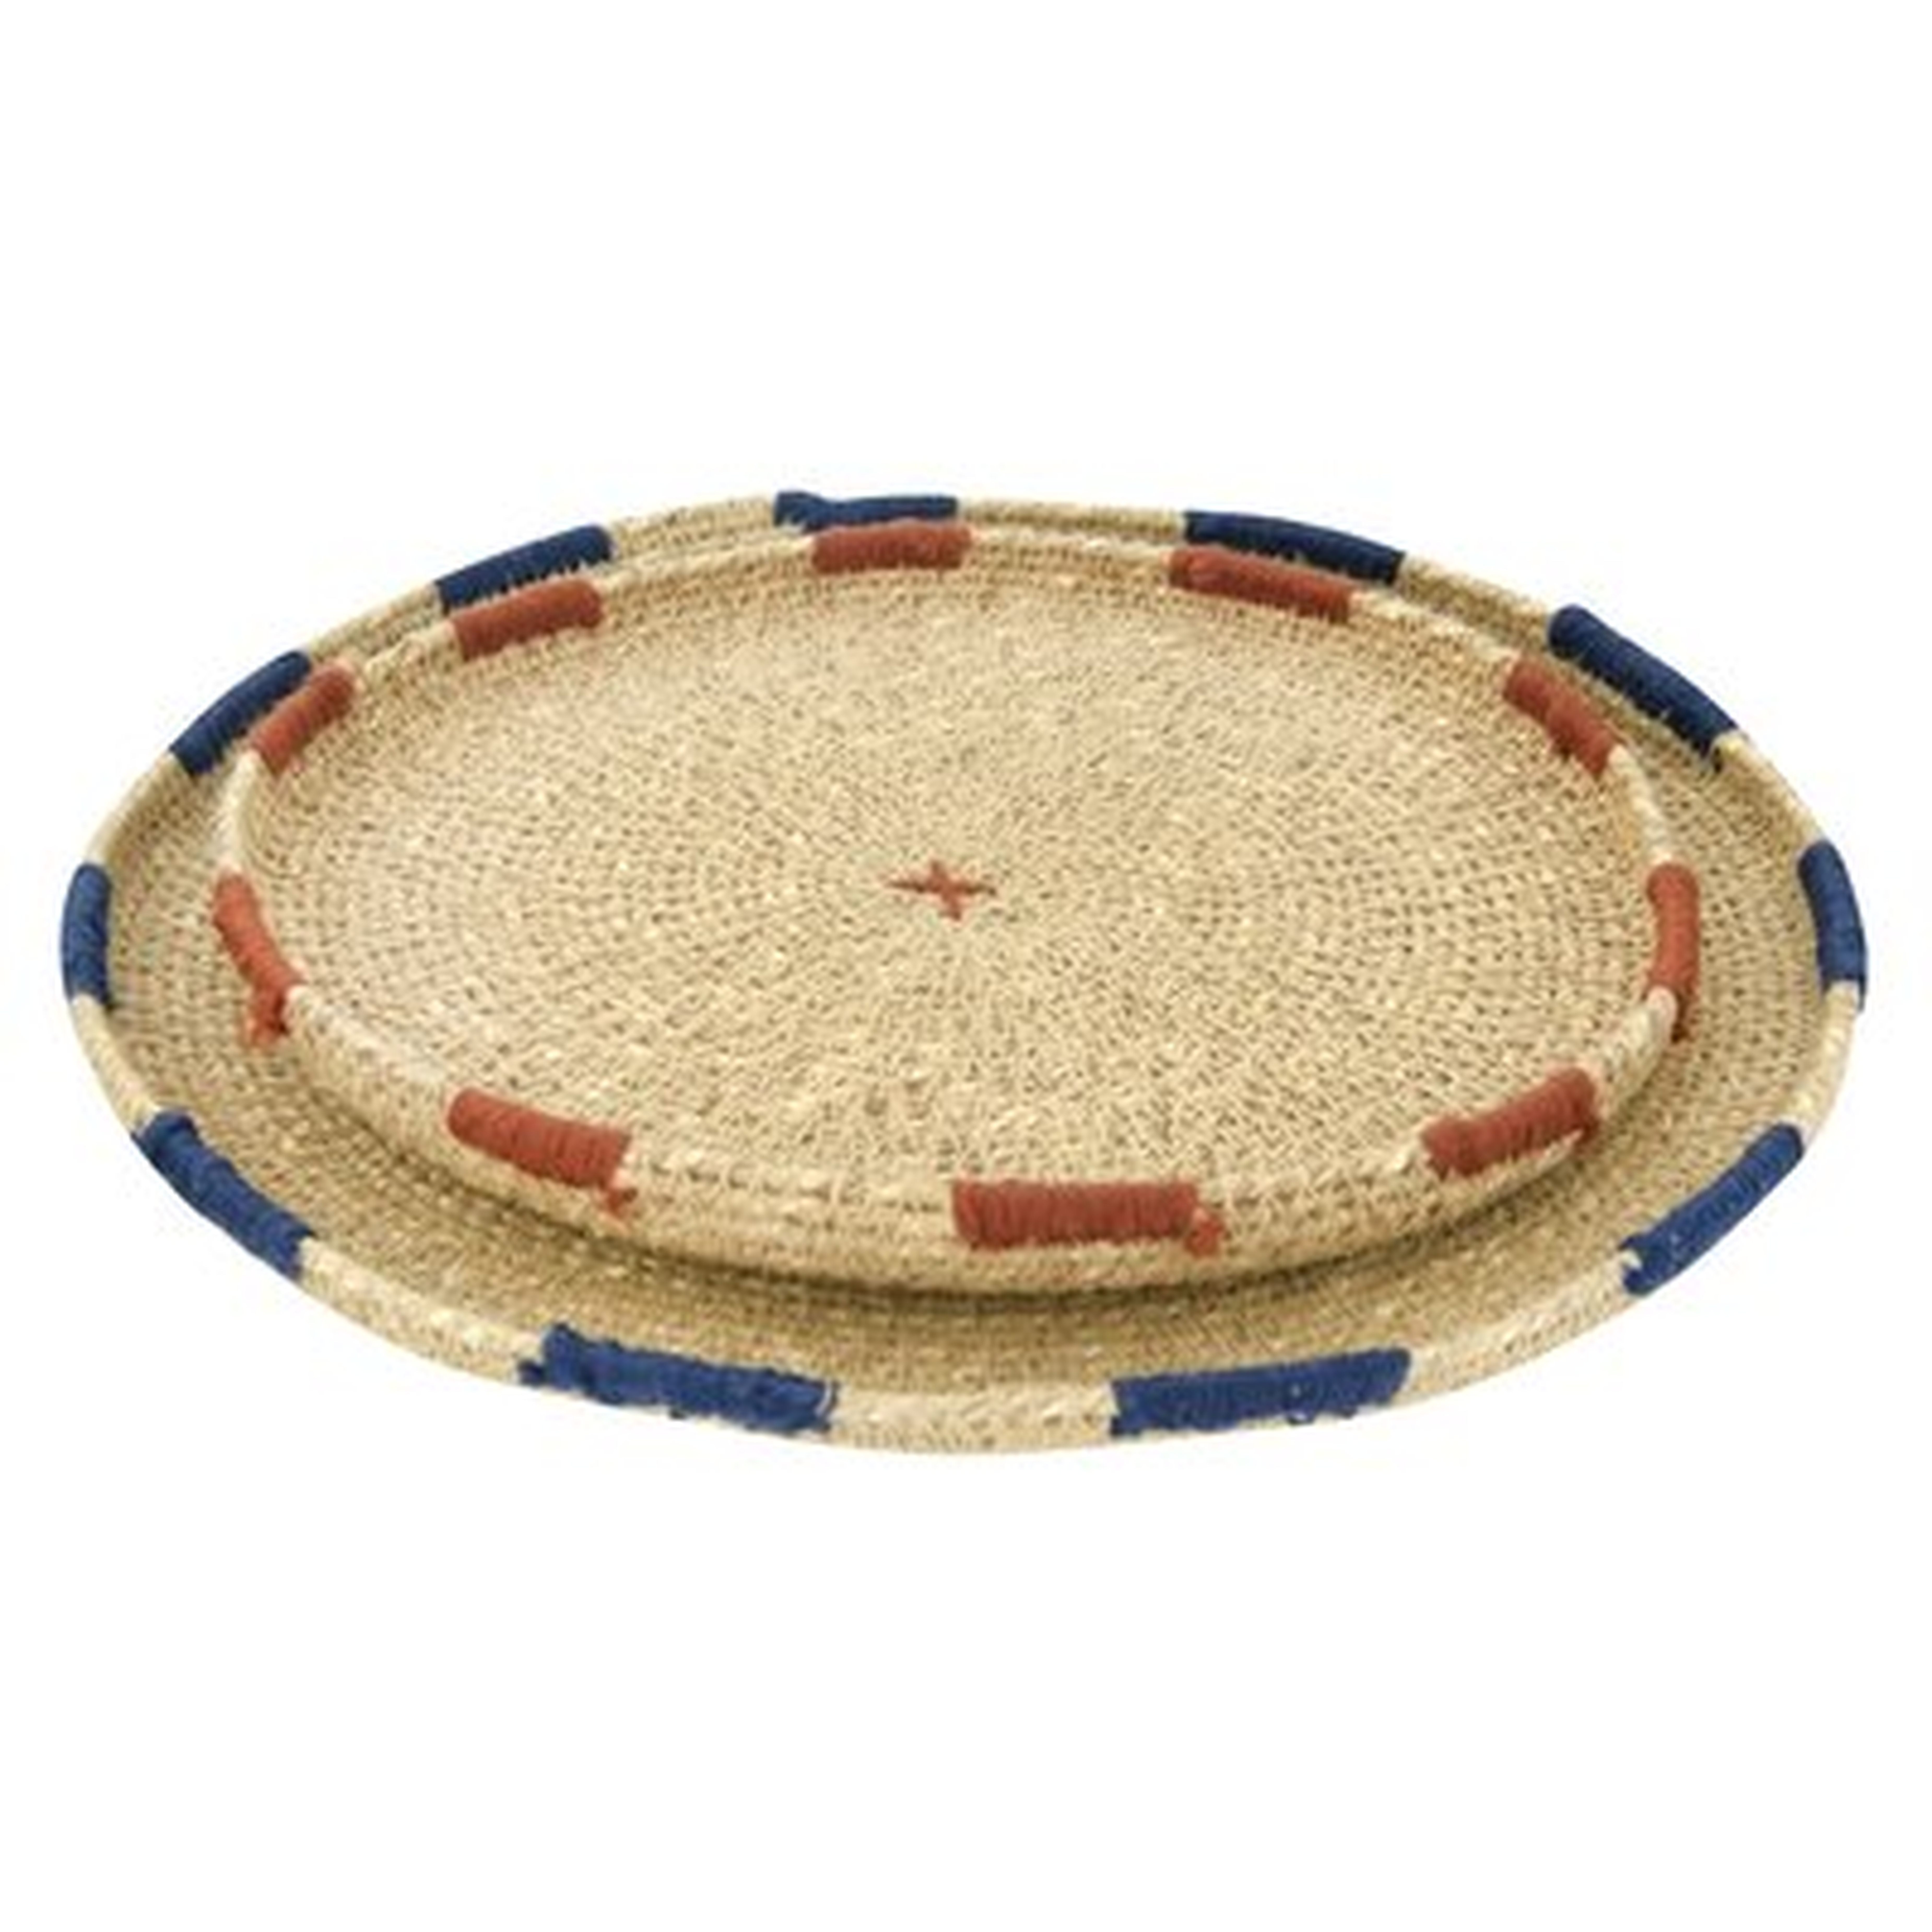 Barry Handwoven Natural Seagrass 2 Piece Coffee Table Tray Set - AllModern